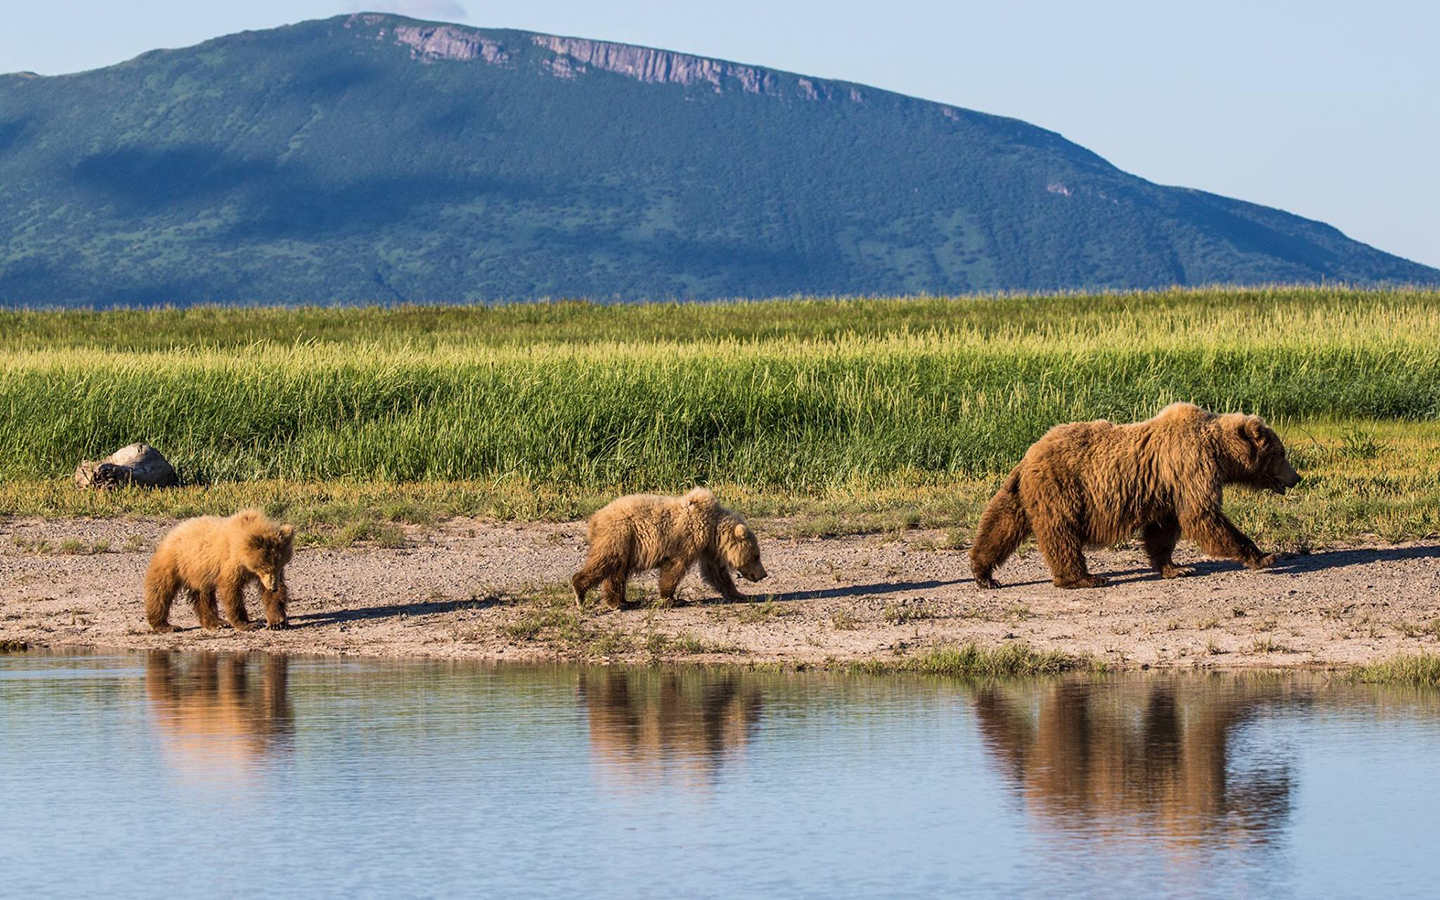 A mama brown bear and her two cubs walk along shoreline of river in a line, green tall grasslands and mountain range behind them